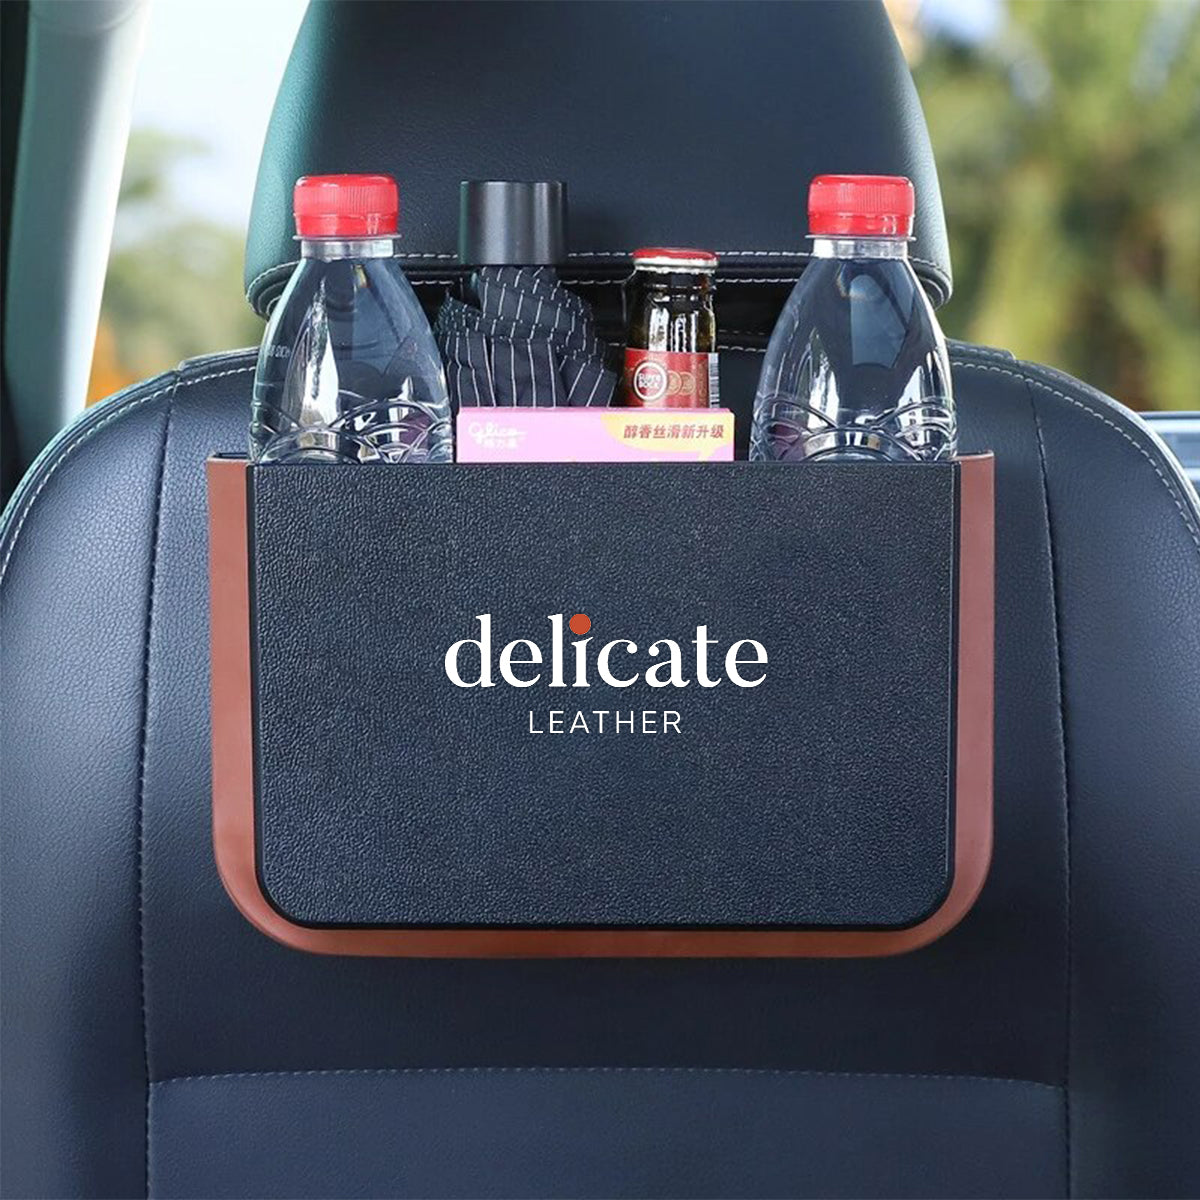 Delicate Leather Hanging Waterproof Car Trash can-Foldable, Custom For Your Cars, Waterproof, and Equipped with Cup Holders and Trays. Multi-Purpose, Car Accessories VE11992 - Delicate Leather